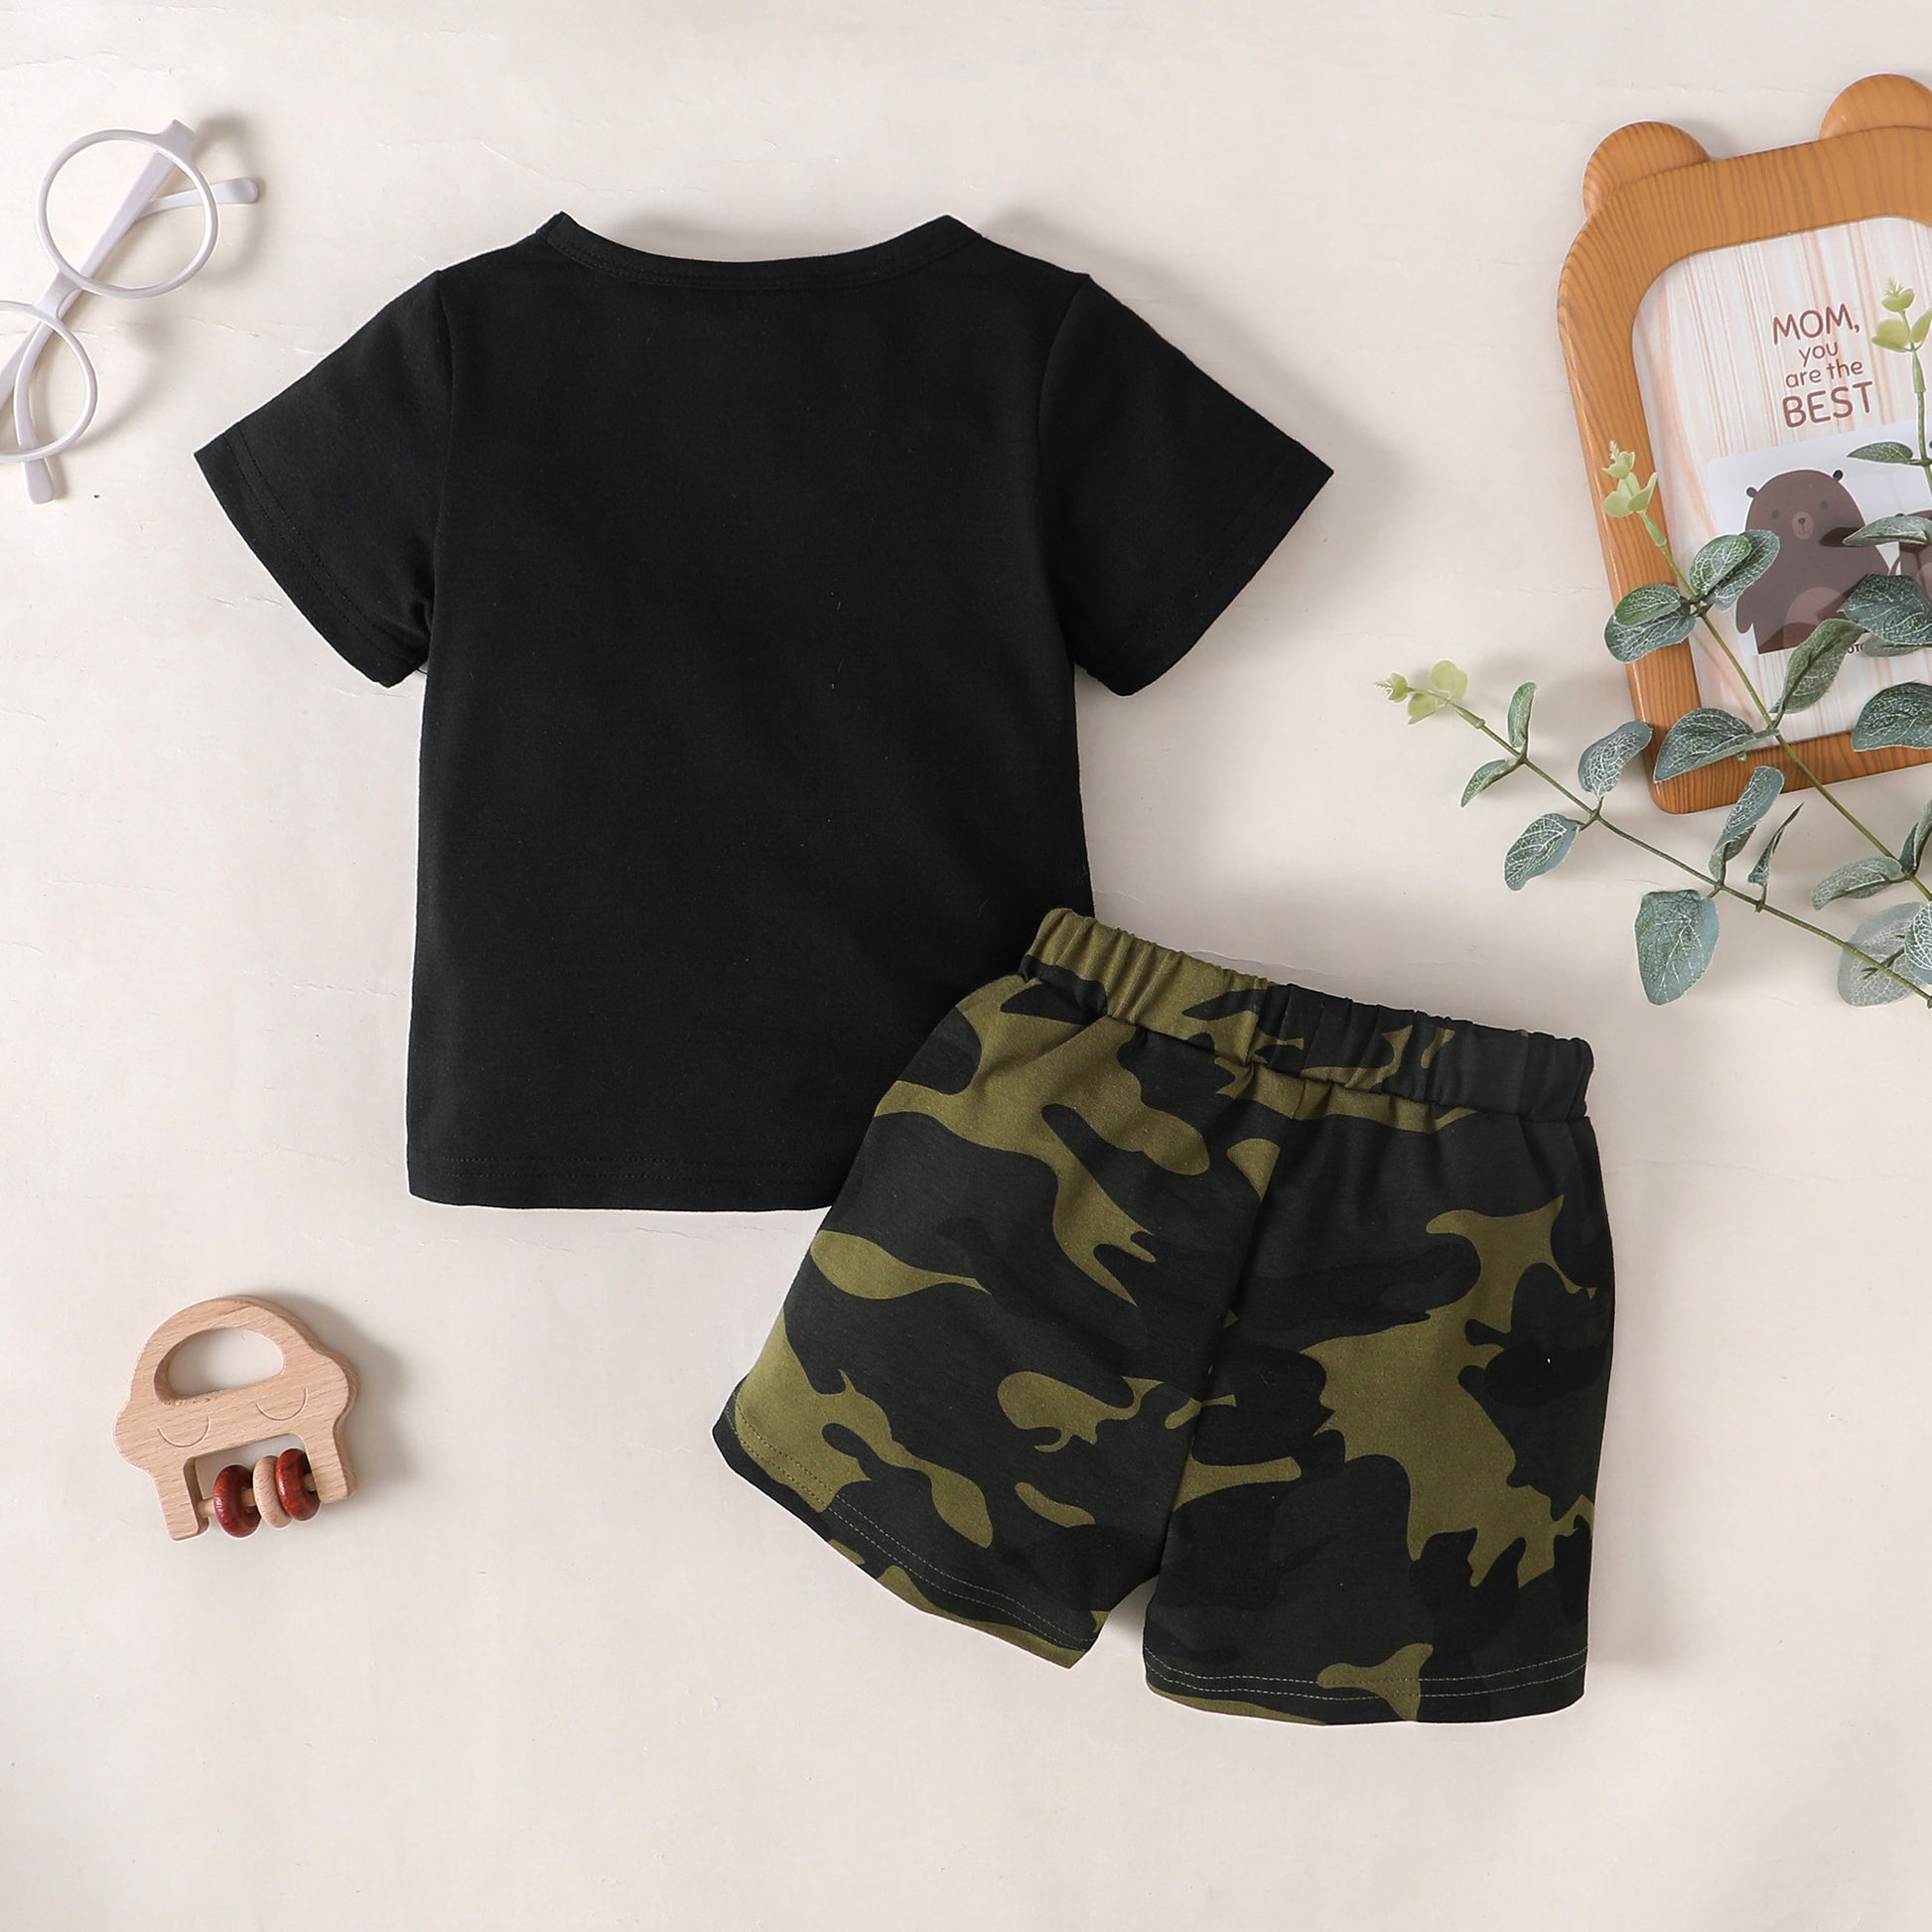 BOY Graphic T-Shirt and Camouflage Shorts Set